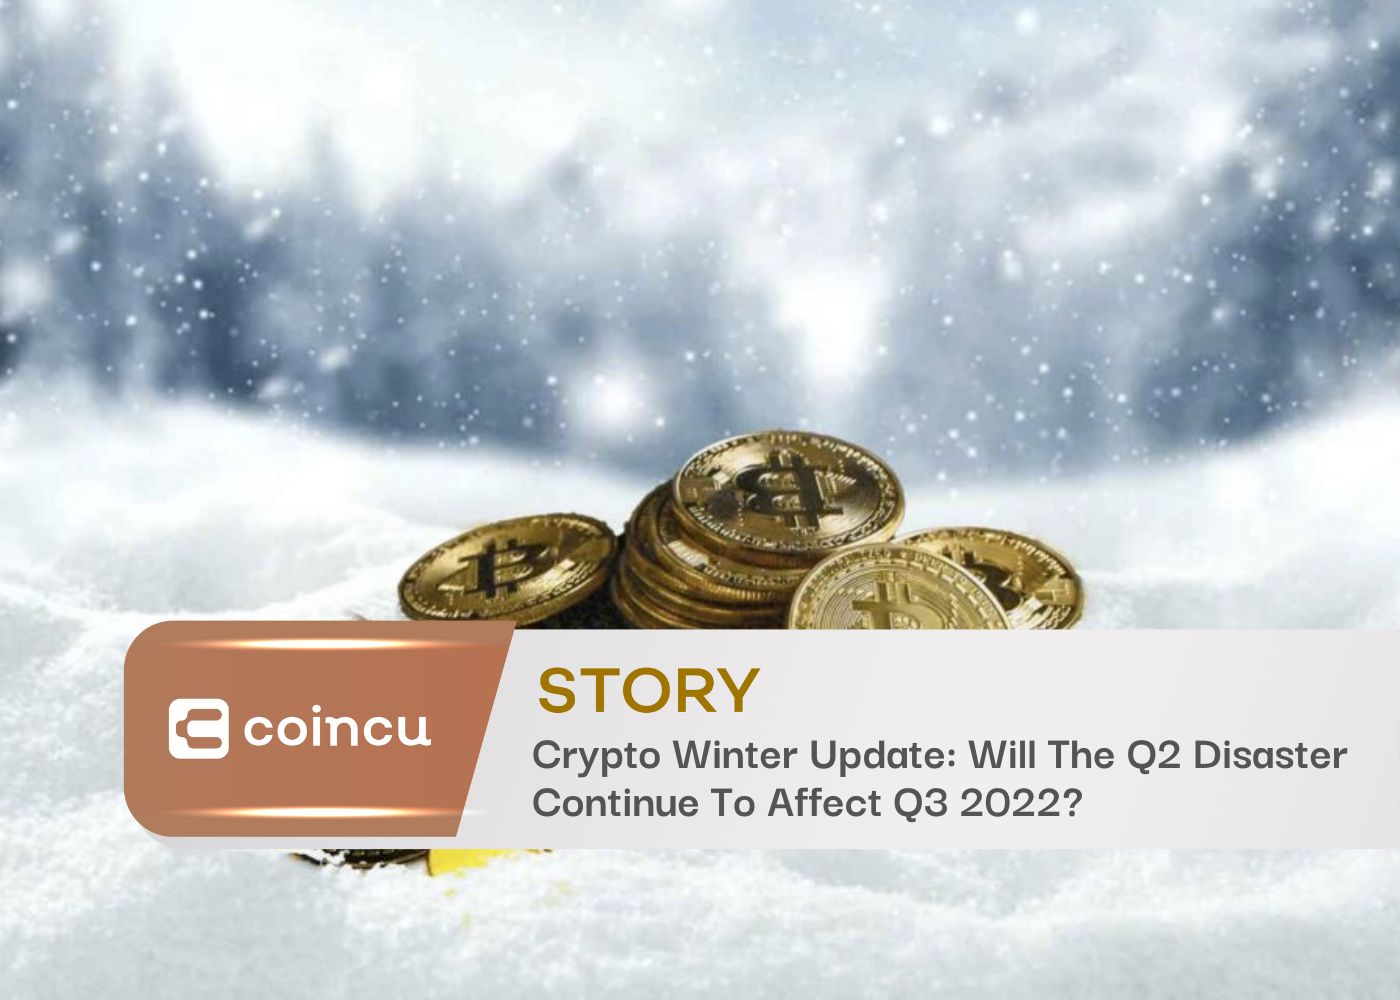 Crypto Winter Update: Will The Q2 Disaster Continue To Affect Q3 2022?